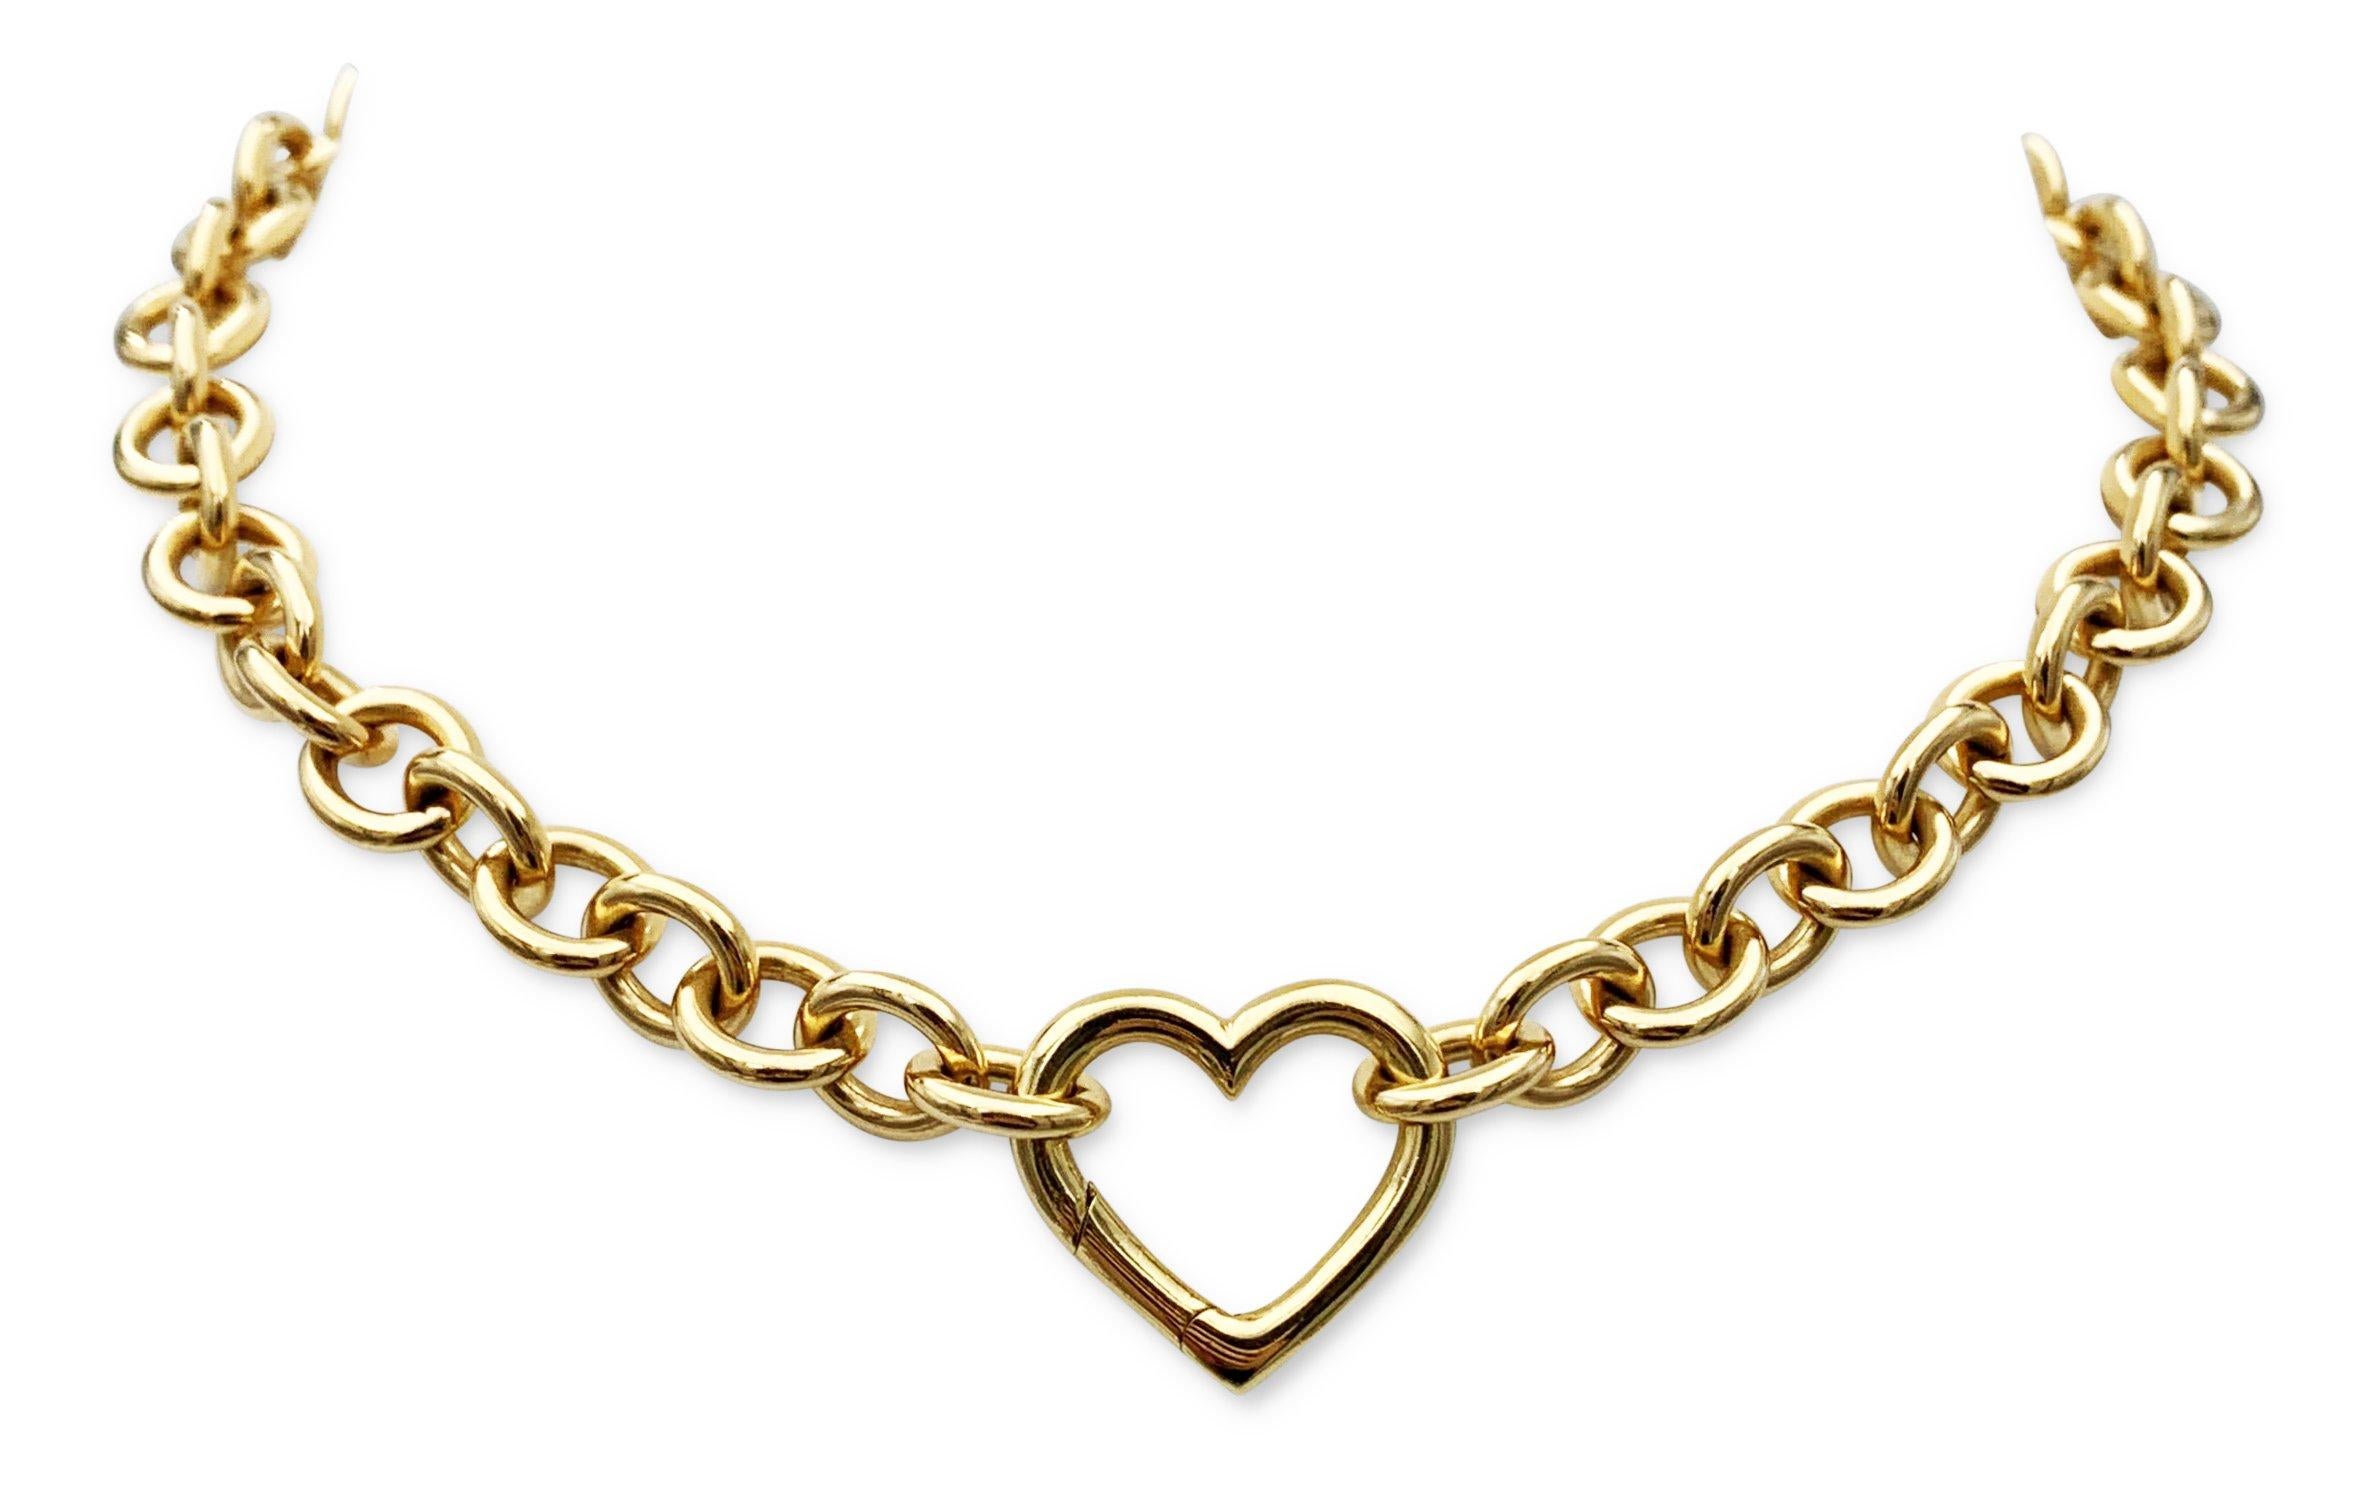 Authentic Tiffany & Co. necklace crafted in 18 karat yellow gold features an open heart pendant clasp. Signed Tiffany & Co., 750. The necklace measures 15 3/4 inches in length. Presented with the original box, no papers. CIRCA 2000s. 